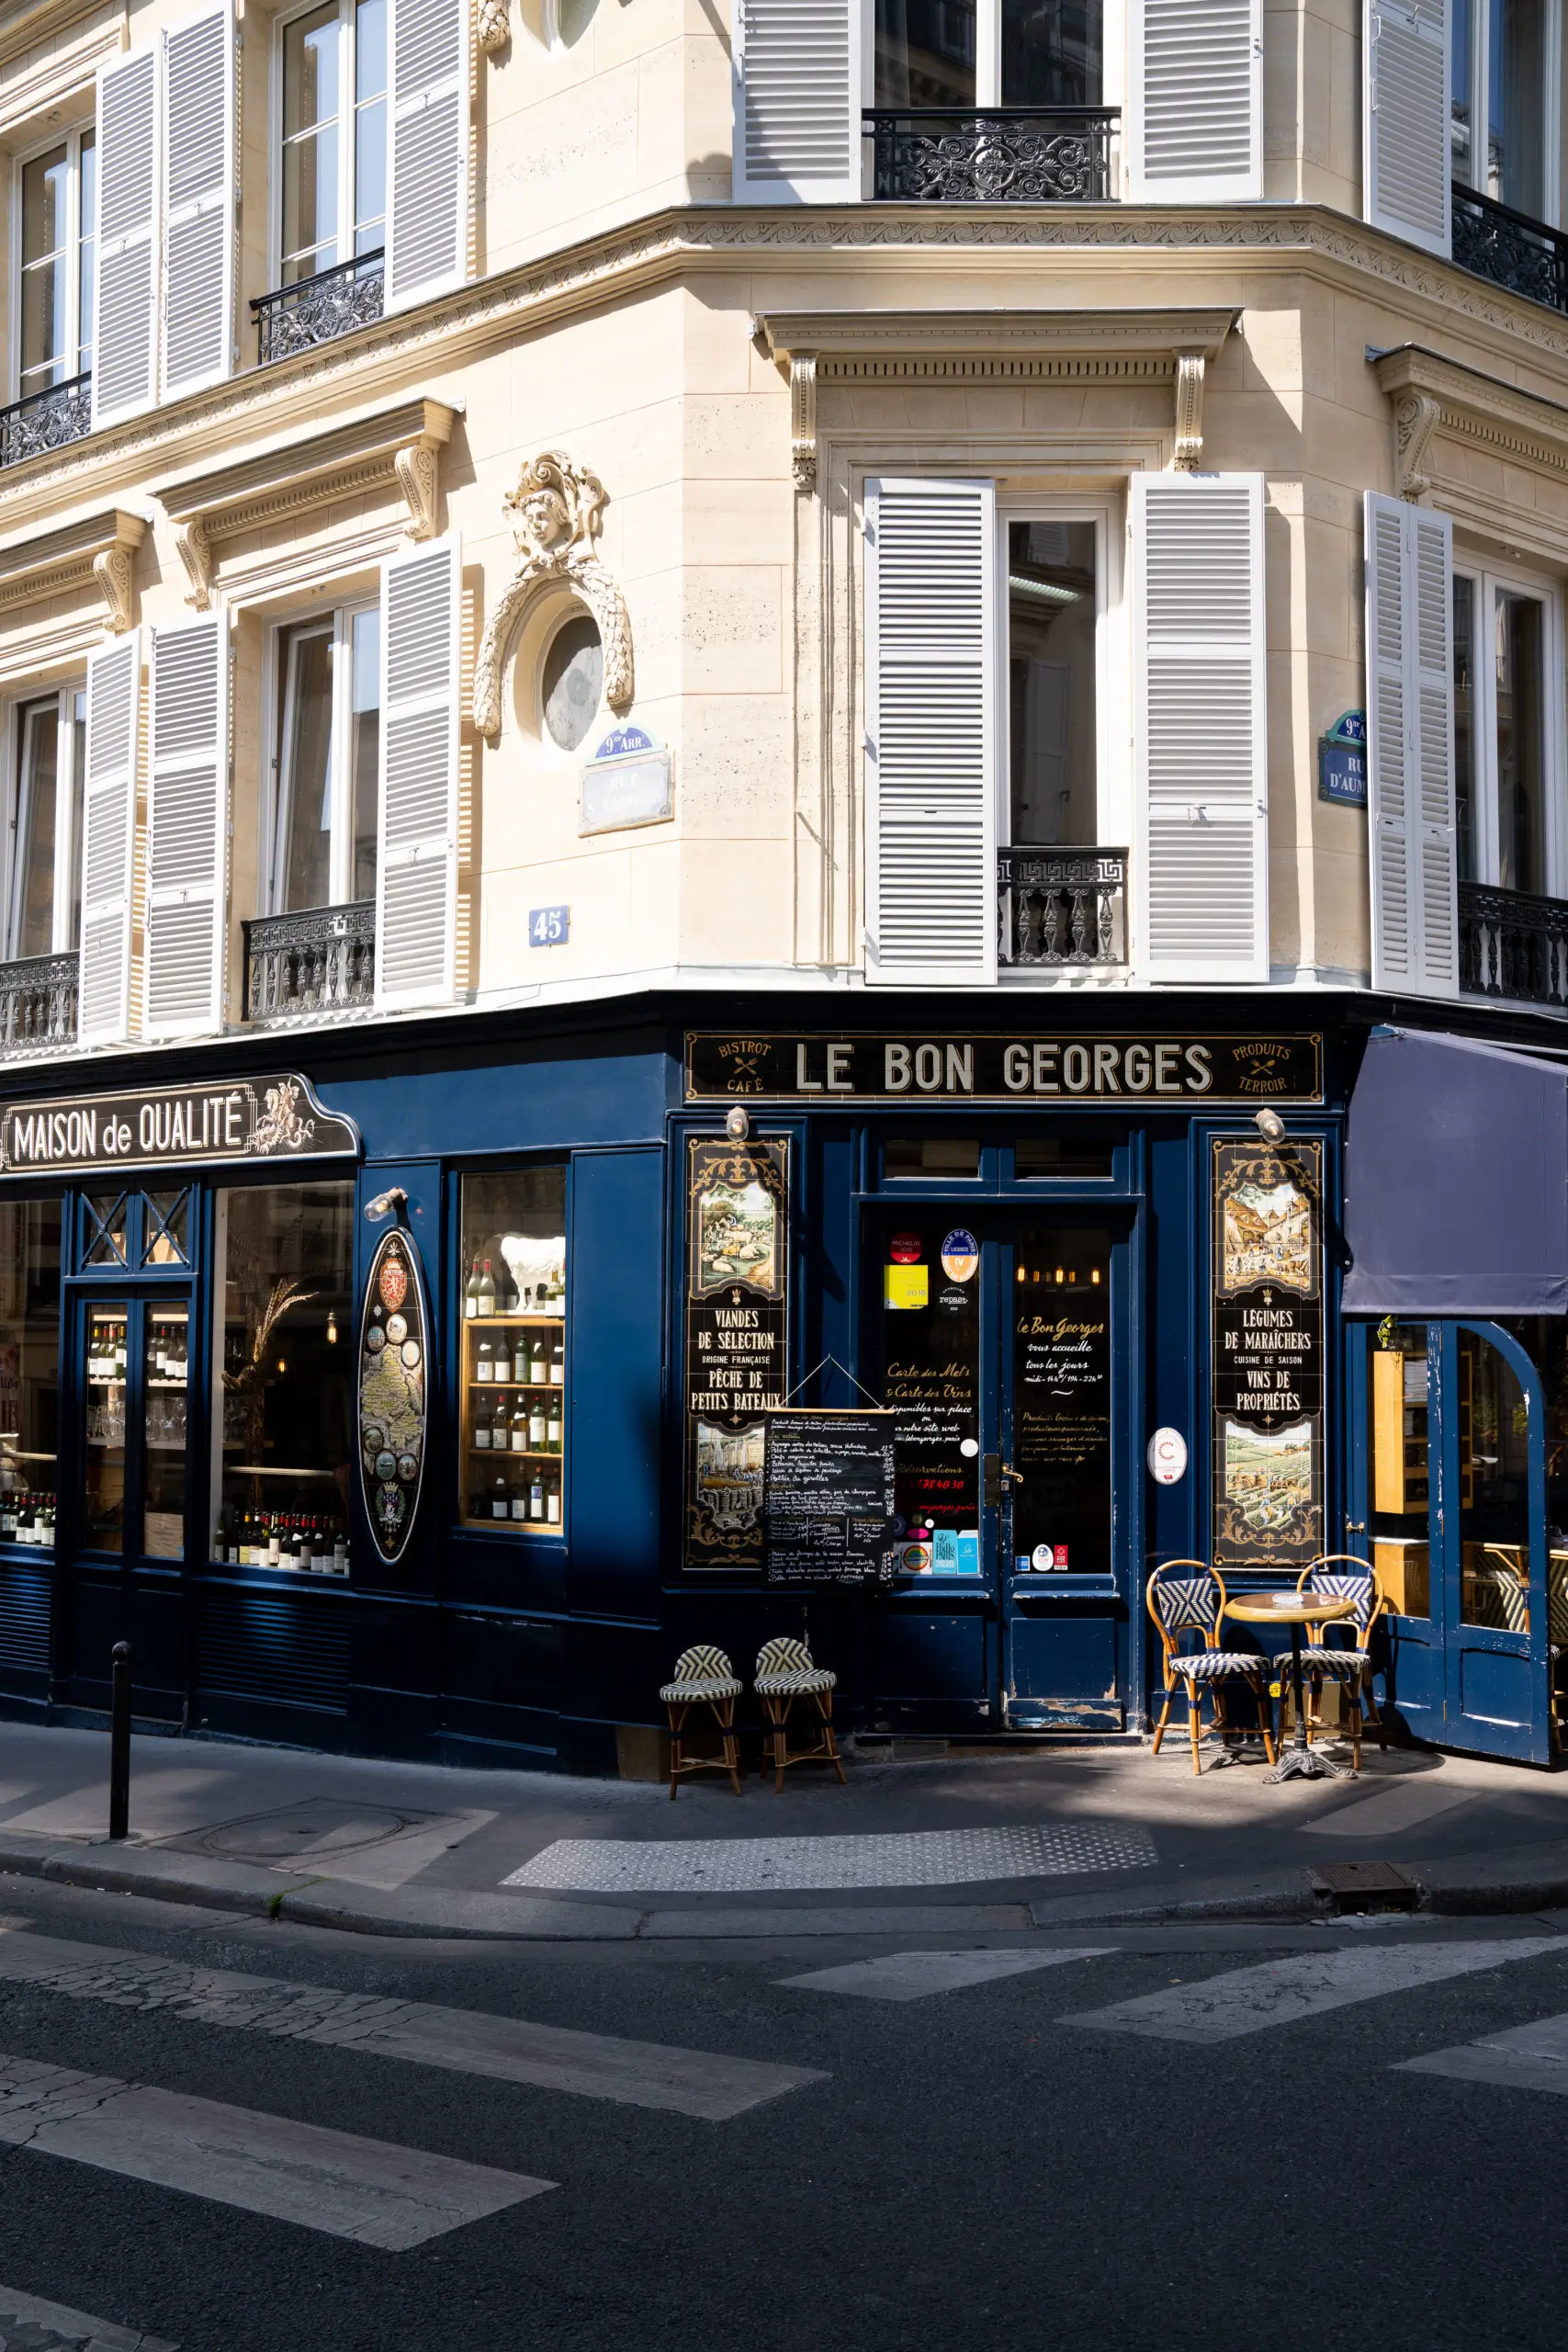 The corner of Le Bon Georges, a classic bistro in Paris, with a navy blue exterior, golden lettering, bistro chairs outside, and a traditional Parisian building facade.